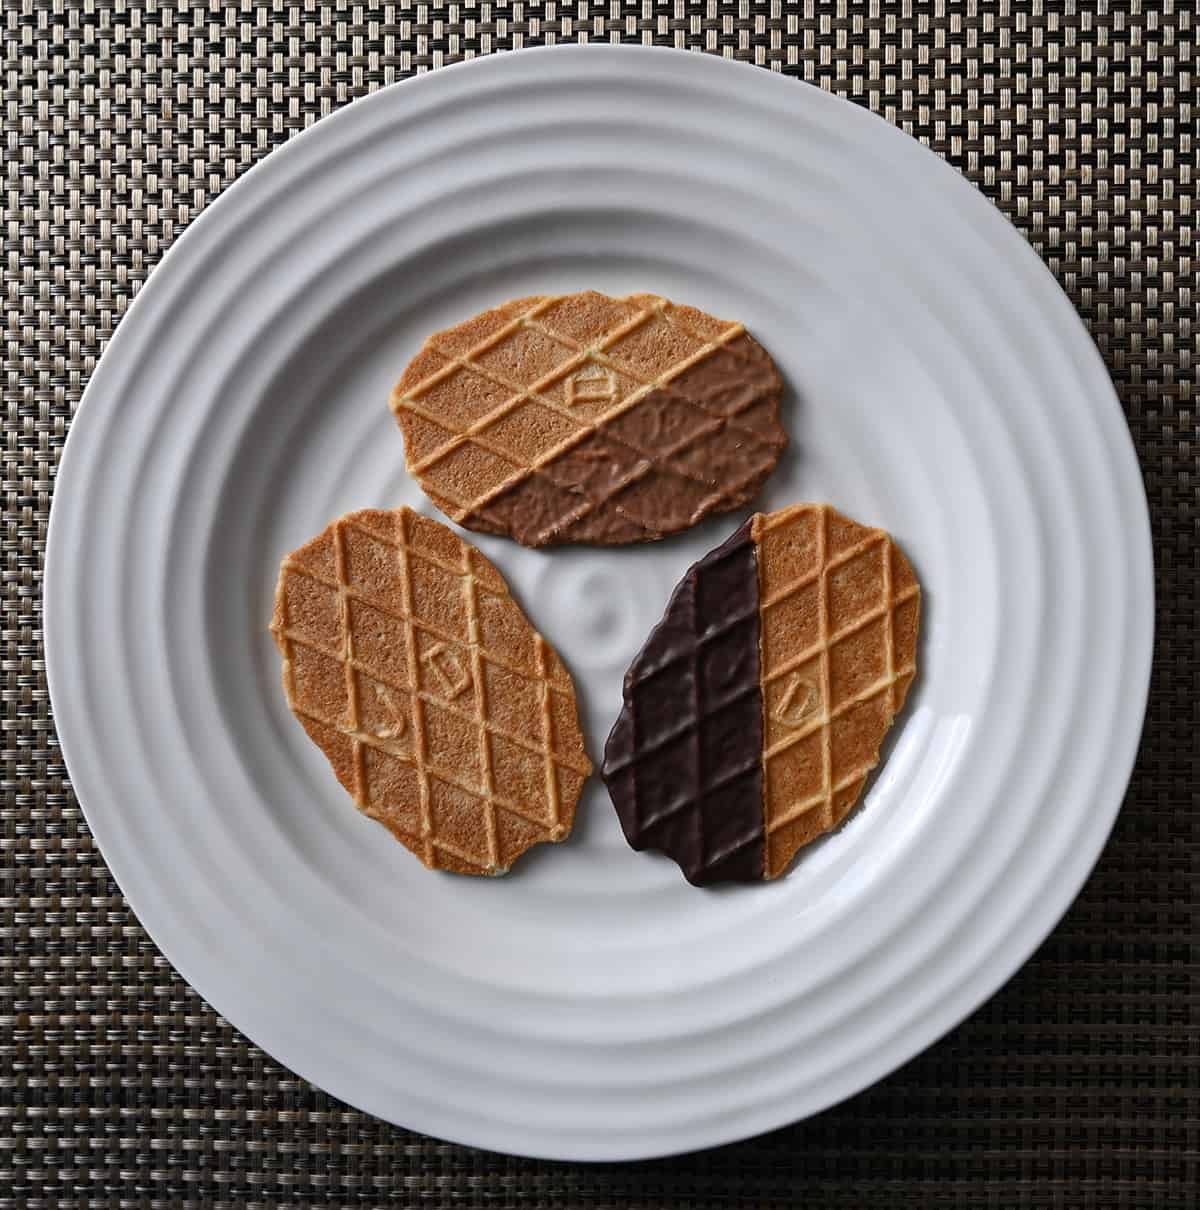 Top down image of three biscuits on a white plate, chocolate dipped, caramel and original butter biscuit.